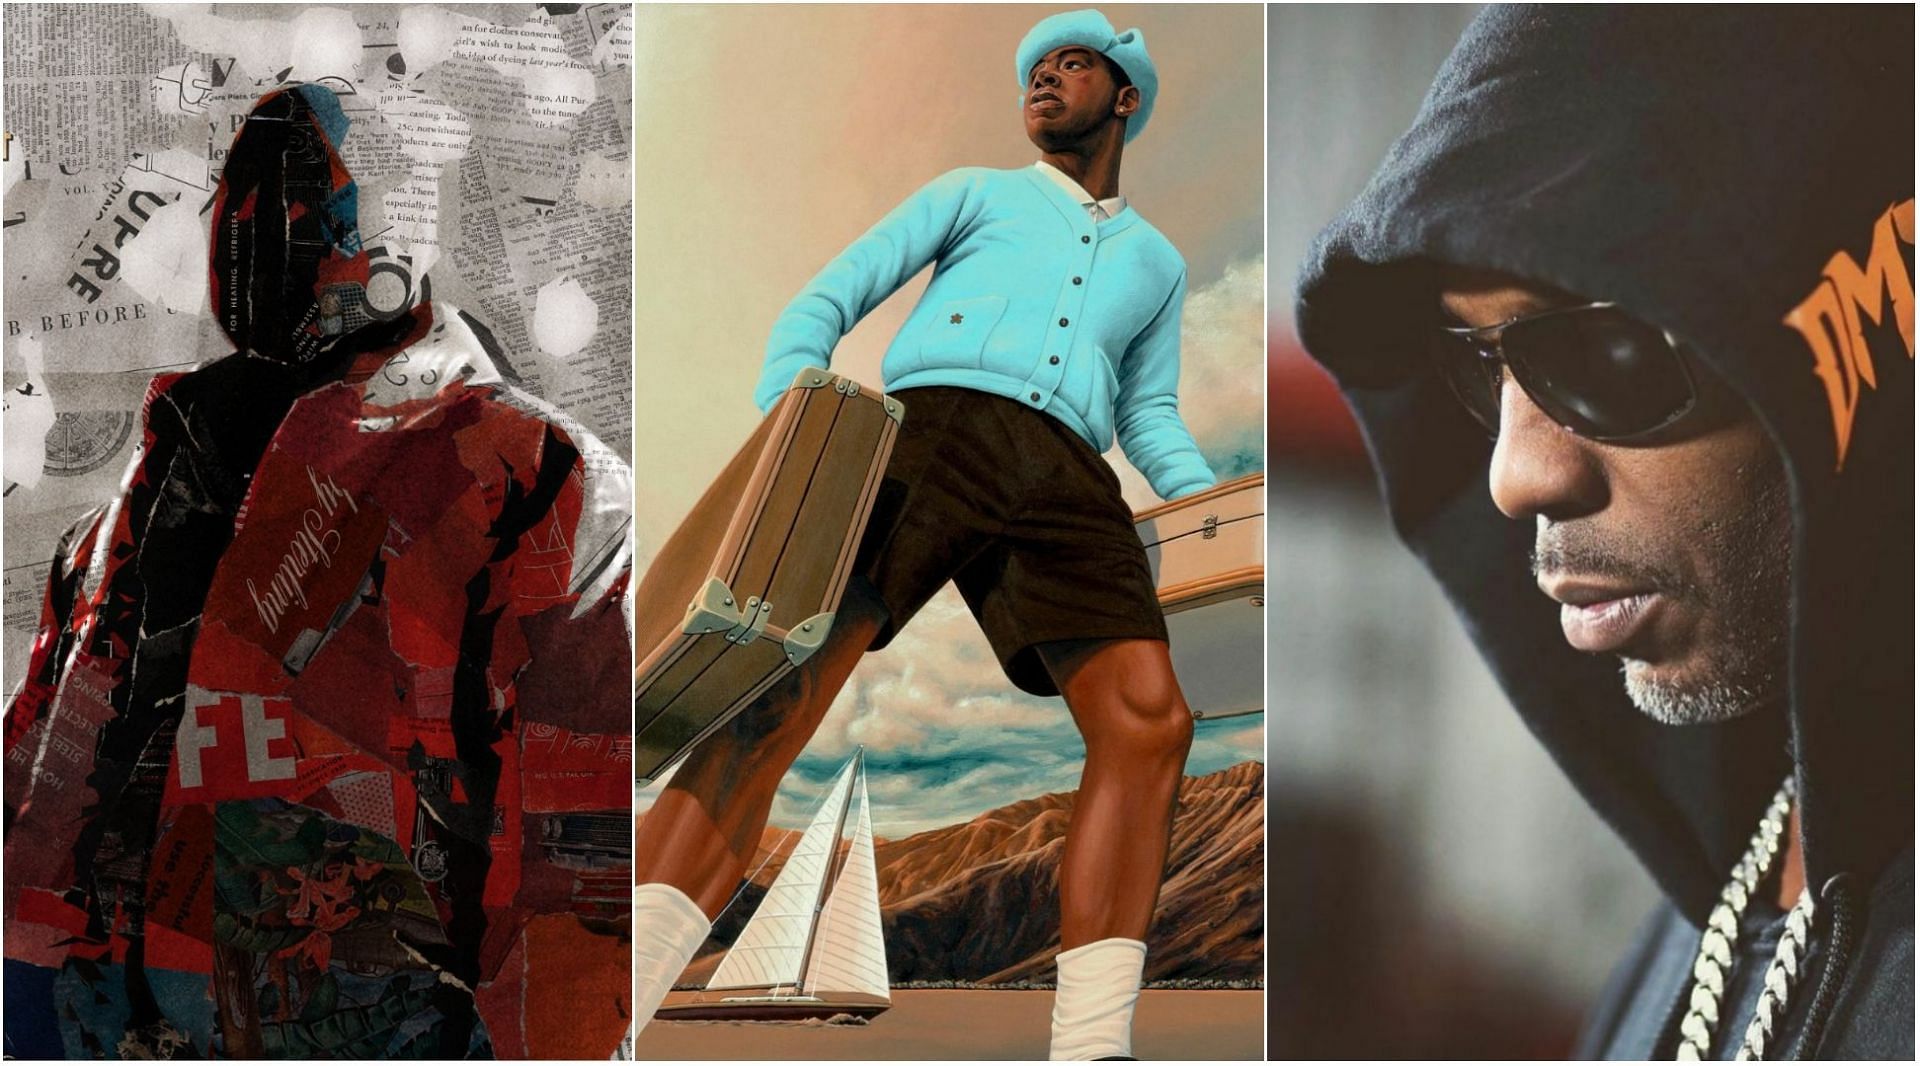 With the 2022 Grammys around the corner, the Best Rap Album category is a hotly-contested one. (Images via Instagram: @nas, @tylerthecreator, Twitter: @photosofkanye)